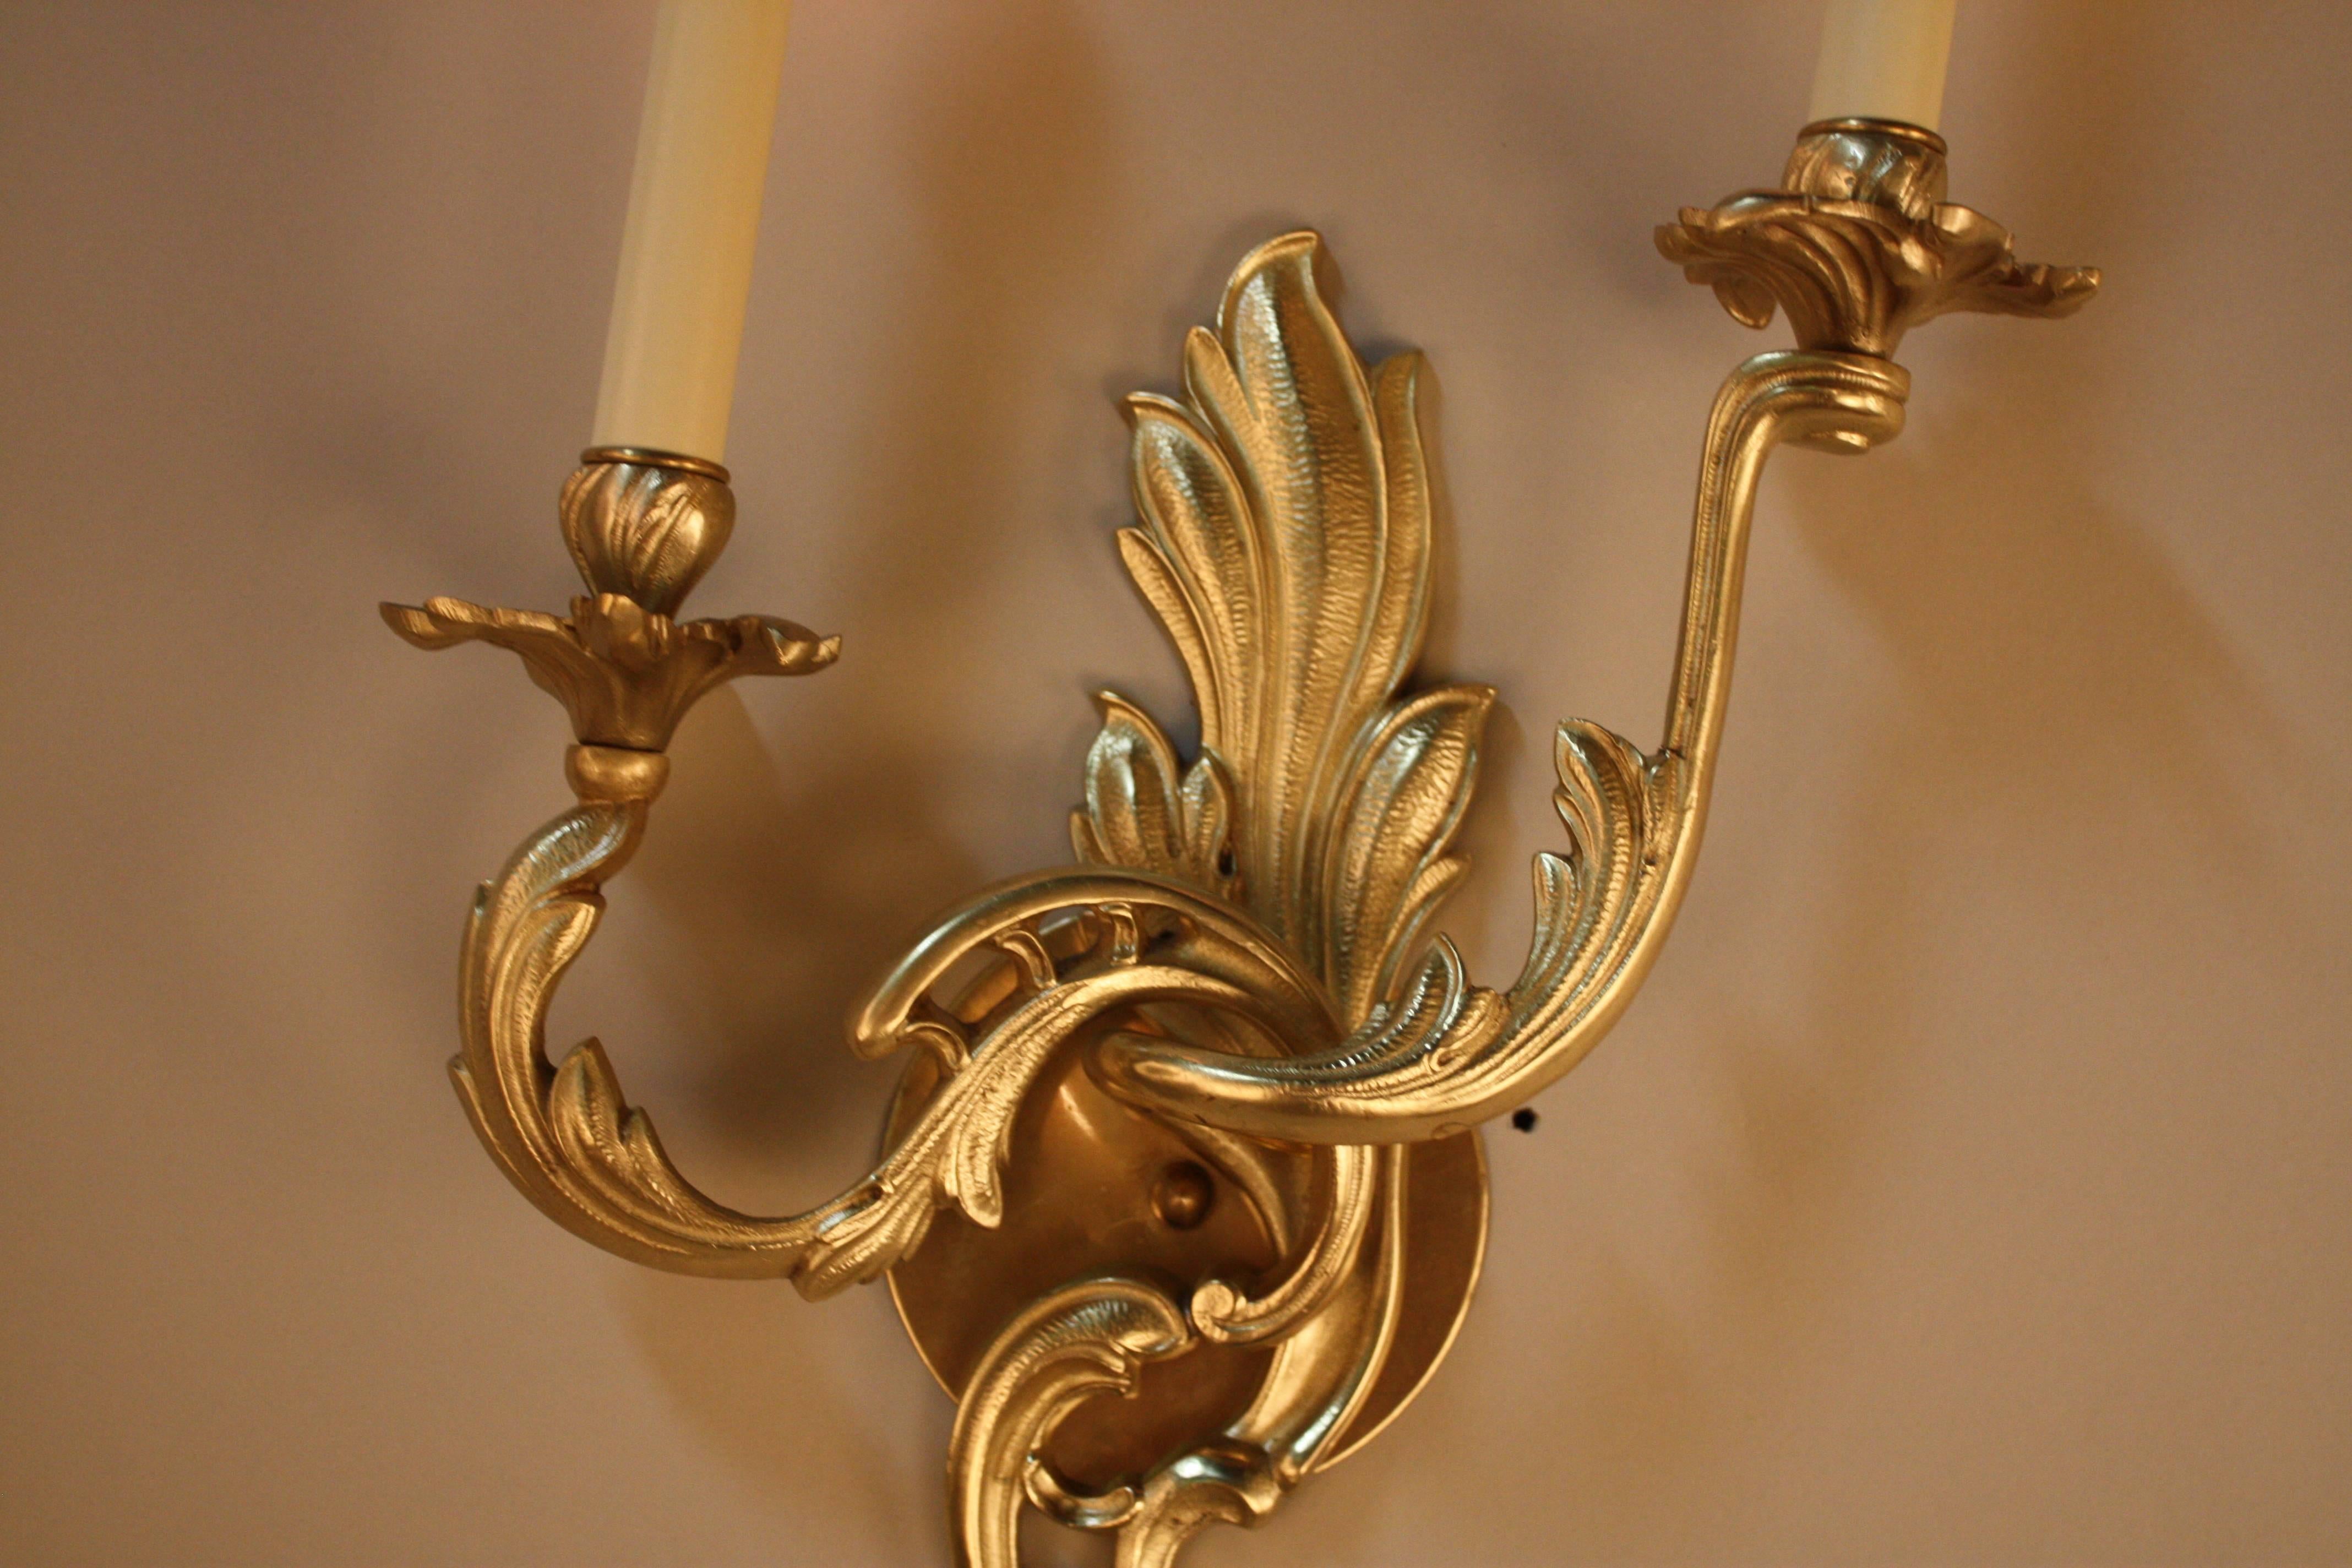 An elegant pair of double arm wall sconces. Made in France during the 1930s, this pair of sconces features beautiful bronze in an organically-inspired design; a classic example of Art Nouveau.